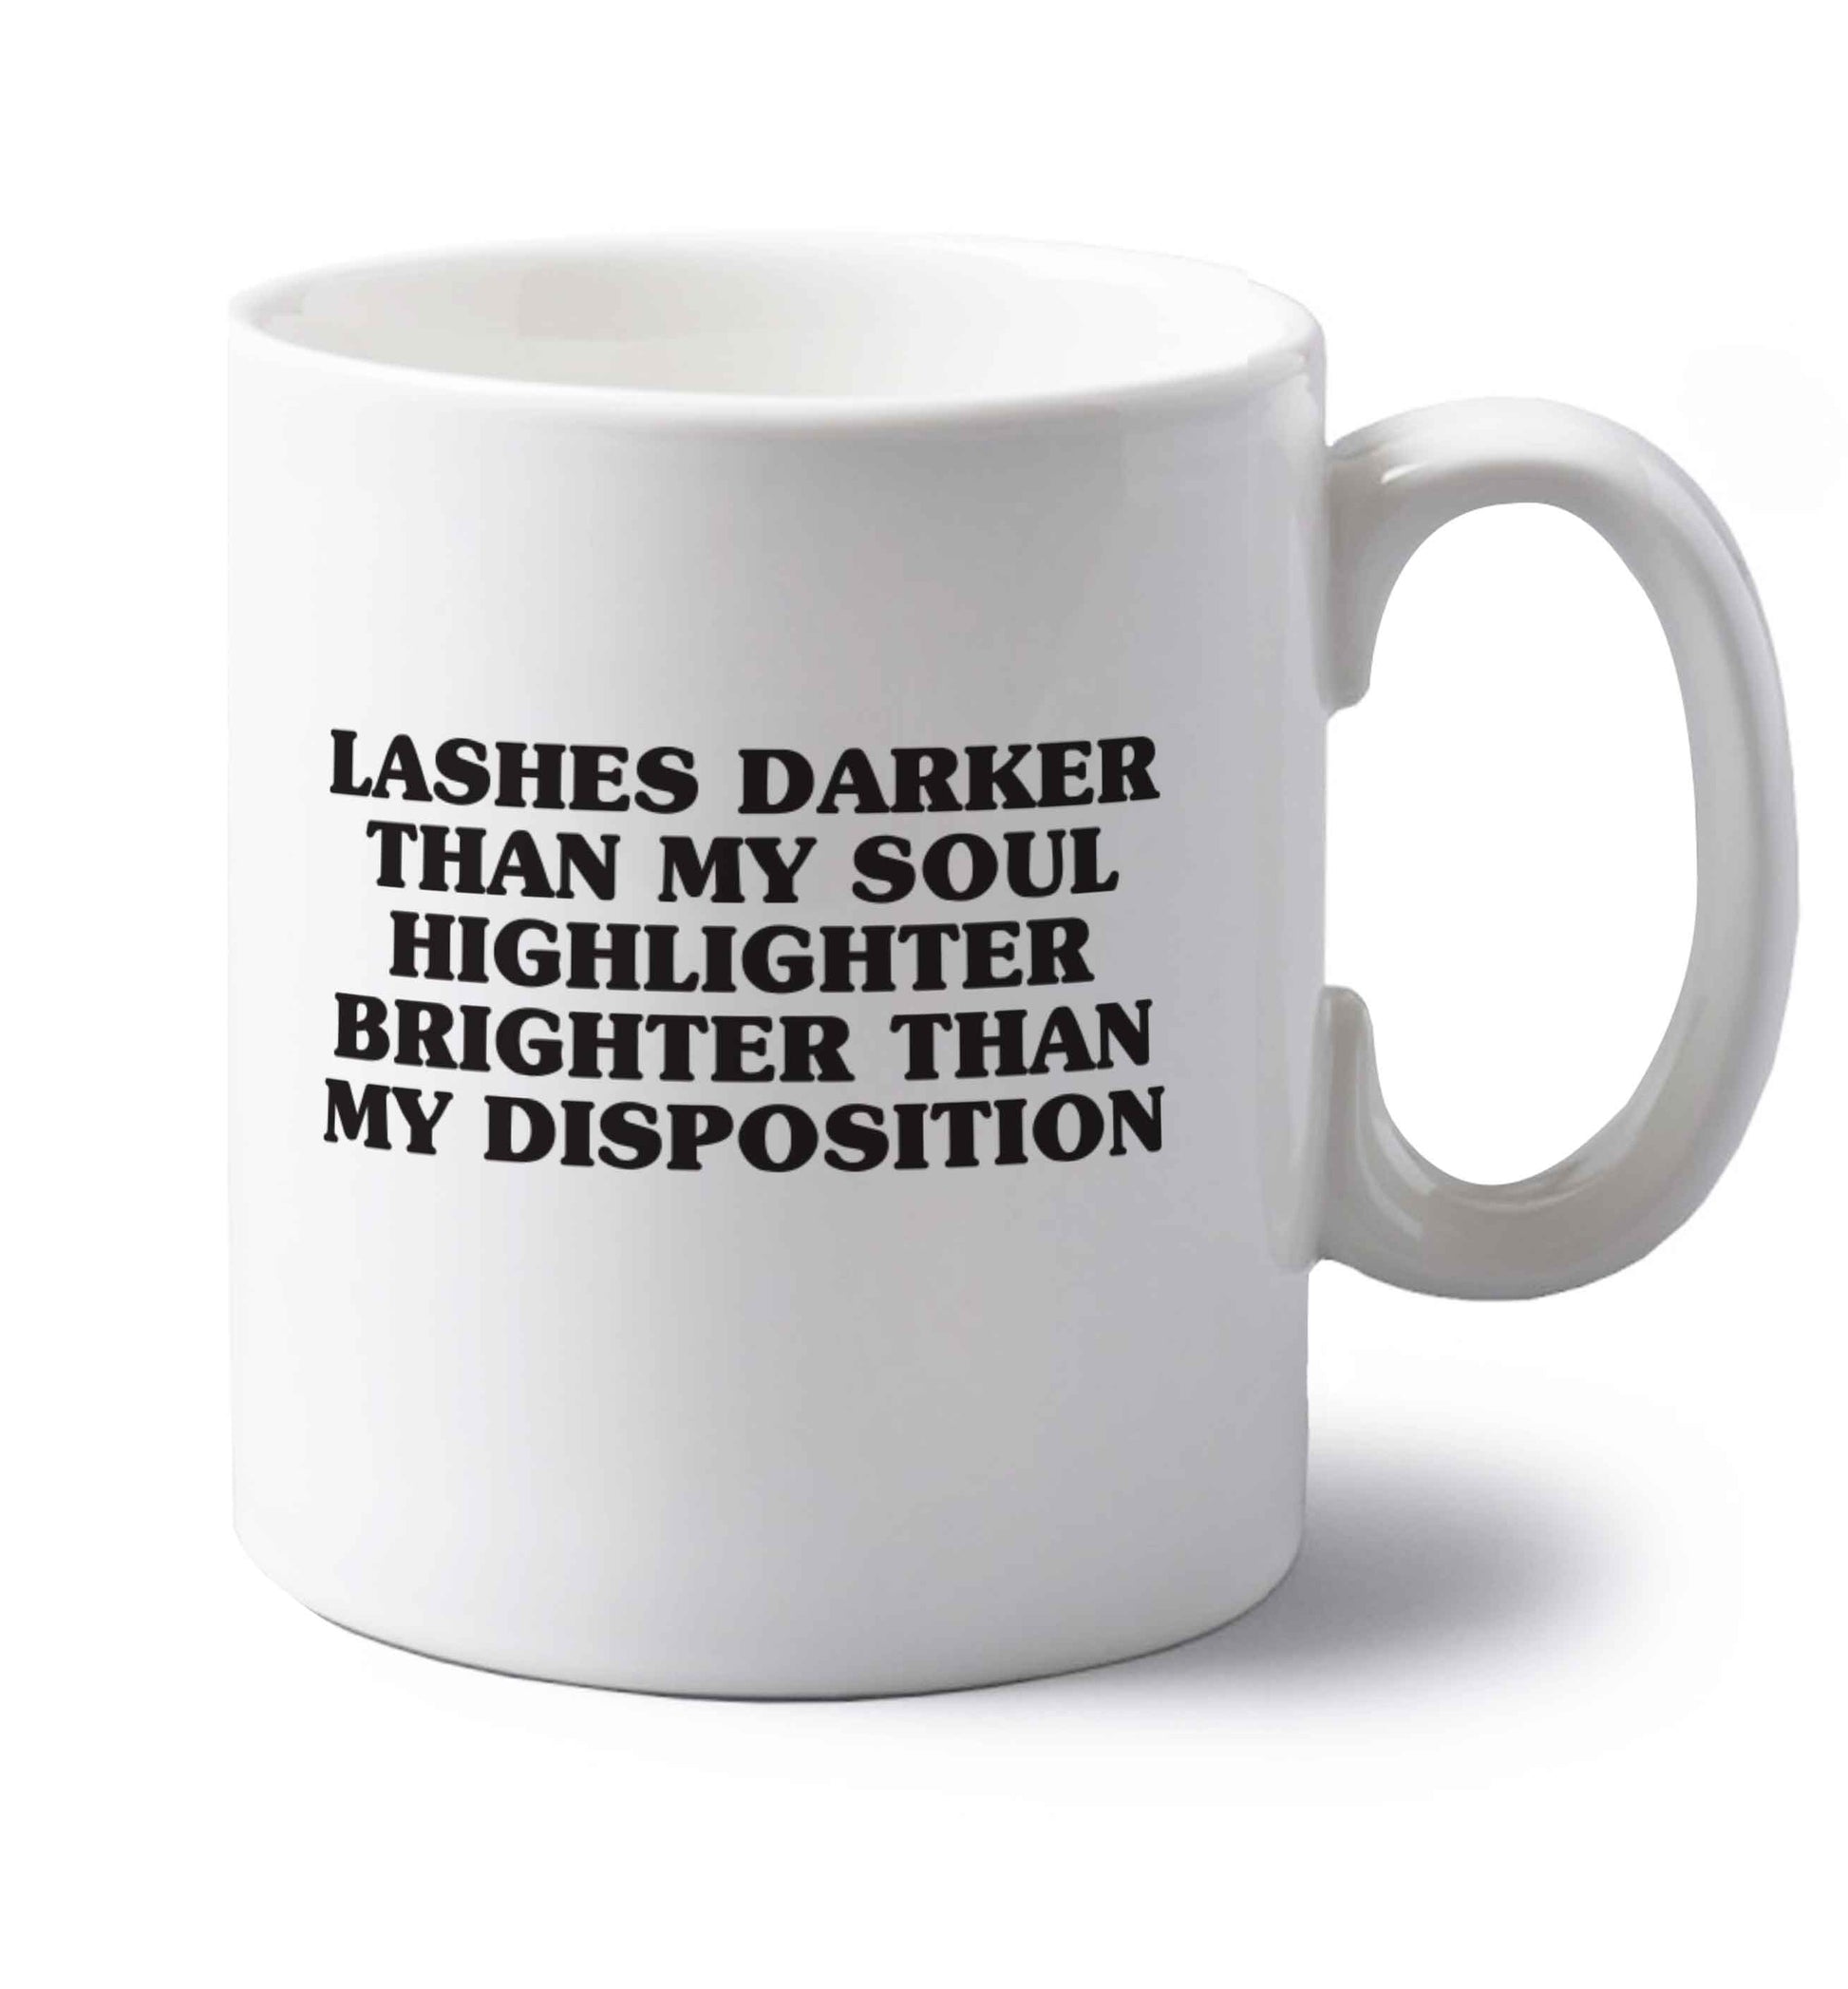 Lashes darker than my soul, highlighter brighter than my disposition left handed white ceramic mug 